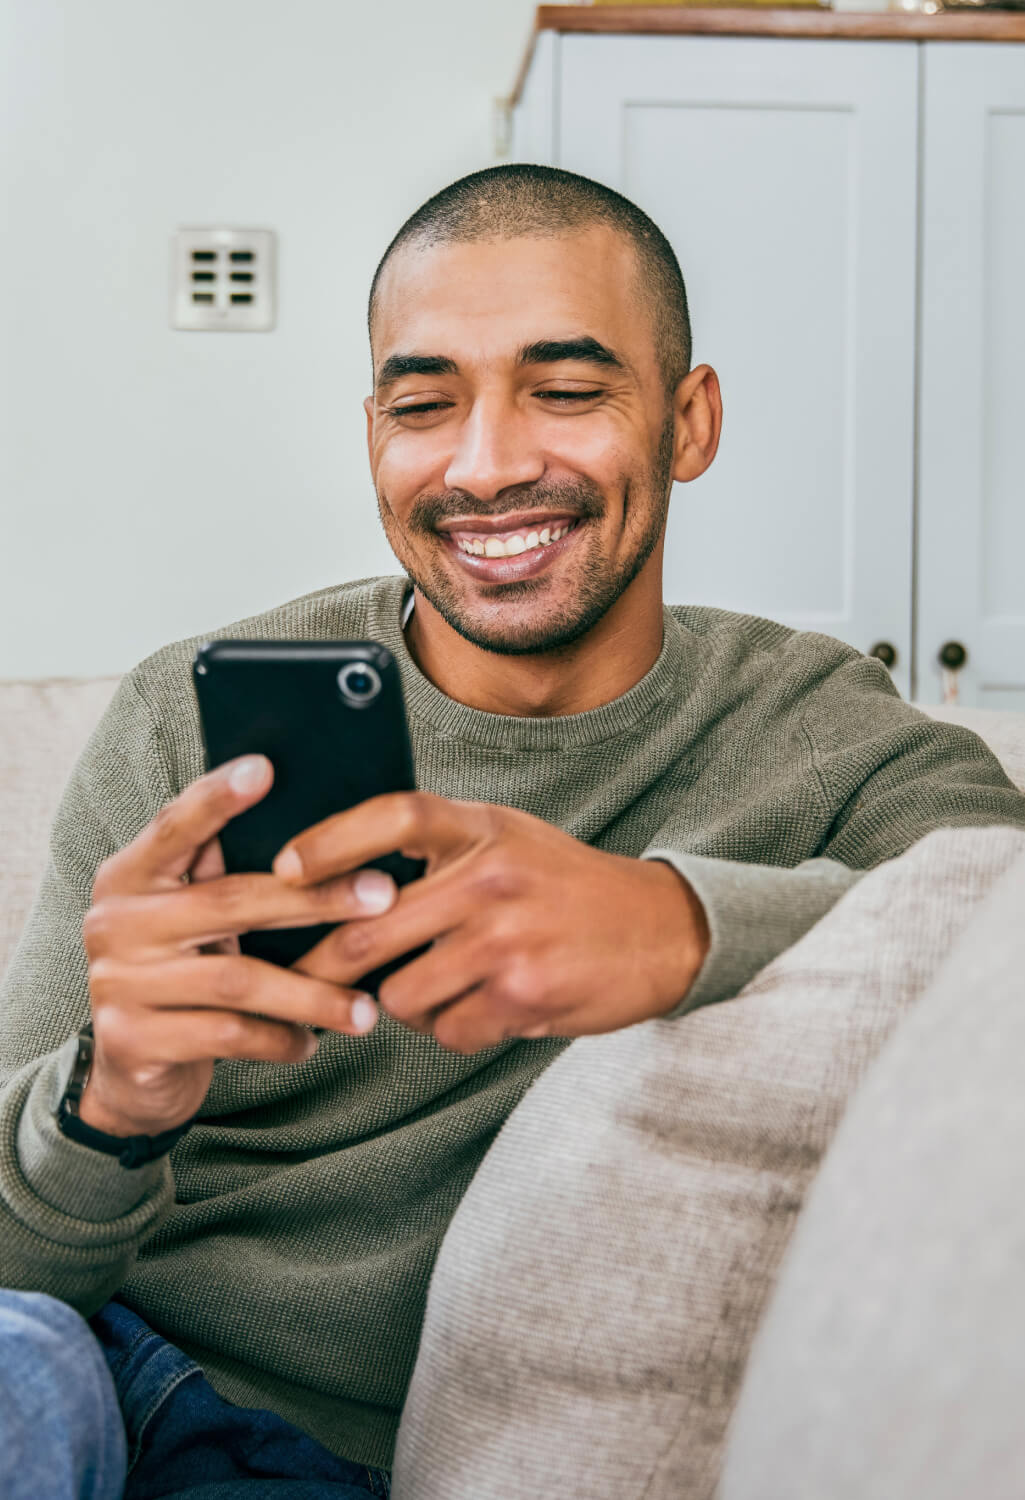 Man sitting on couch, viewing his smartphone